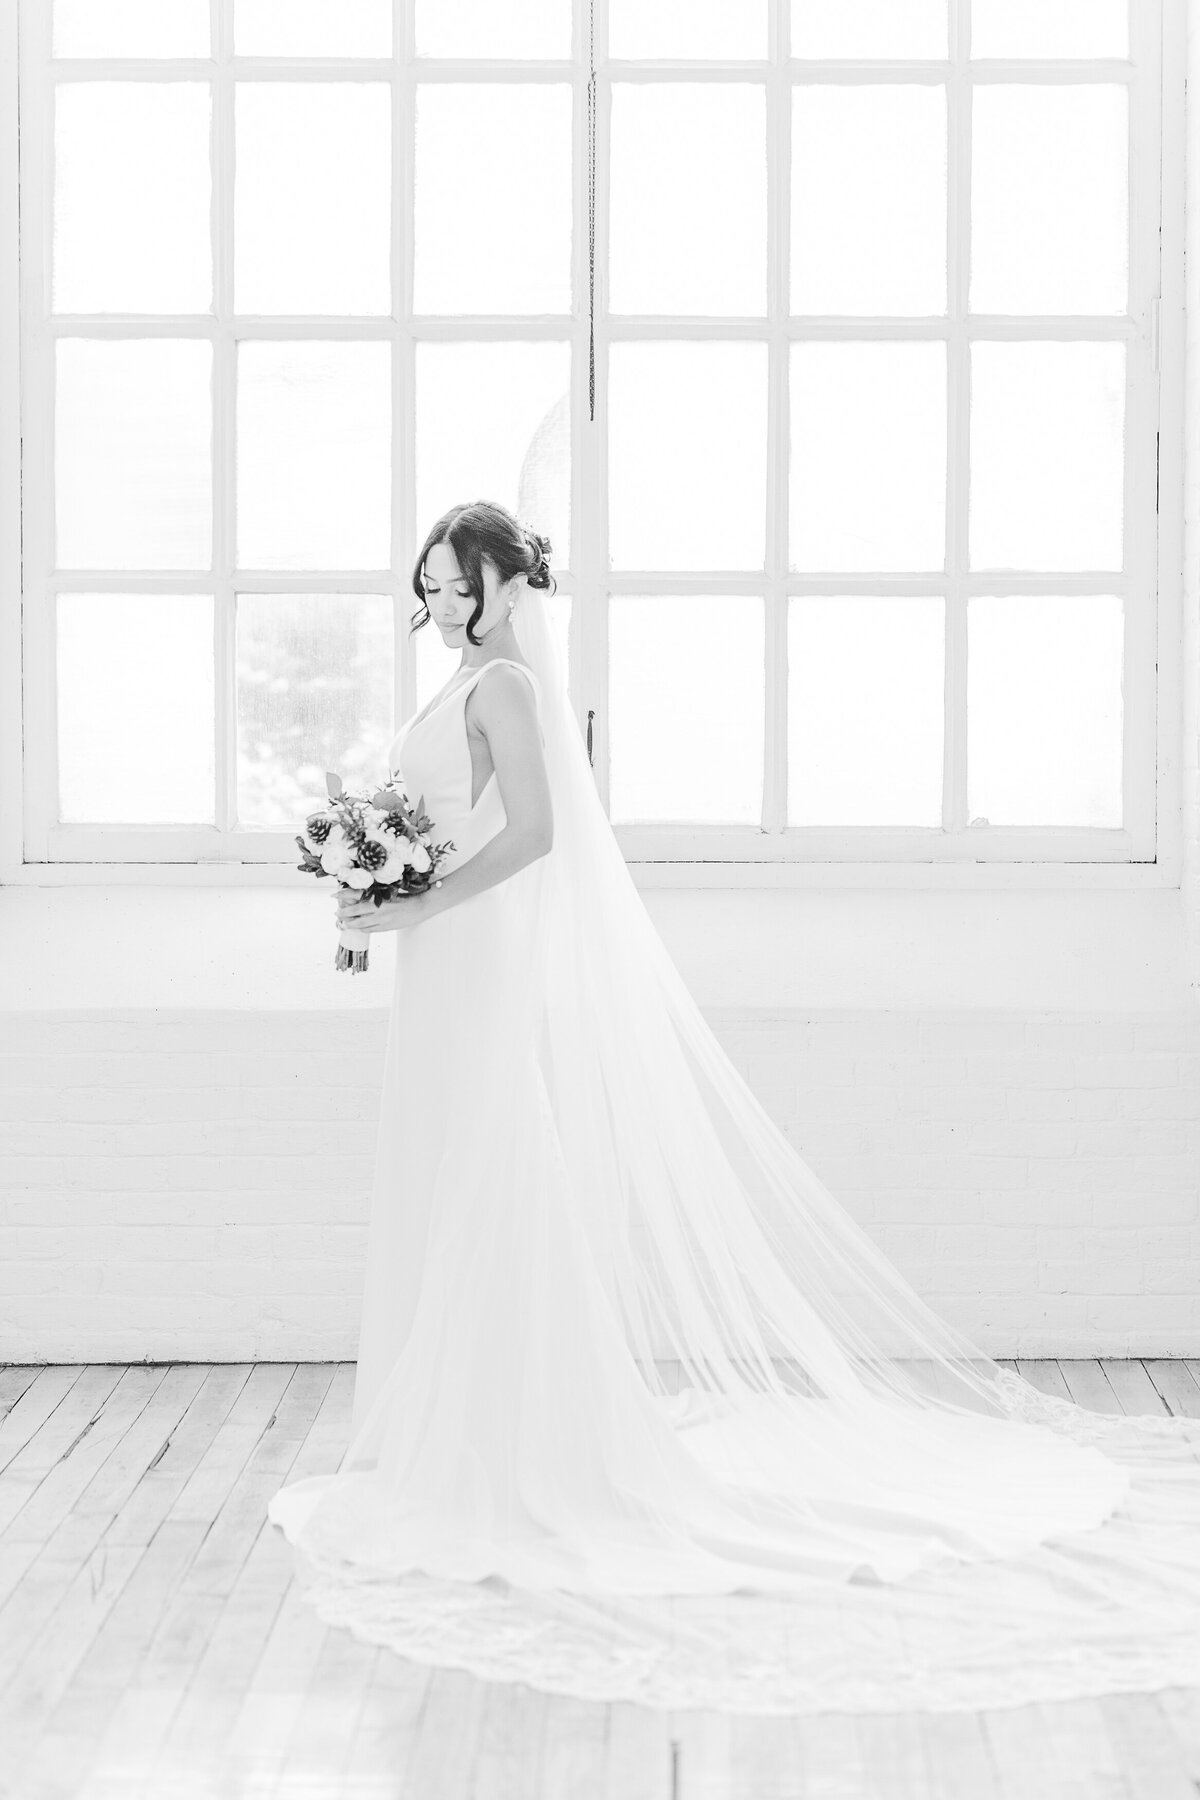 Black and white image. A bride stands in front of large factory windows at Boylston Rooms in Easthampton, MA. The bride is standing side profile to the camera with her bouquet in front of her. She is looking over her shoulder and head town. Captured by MA wedding photographer Lia Rose Weddings